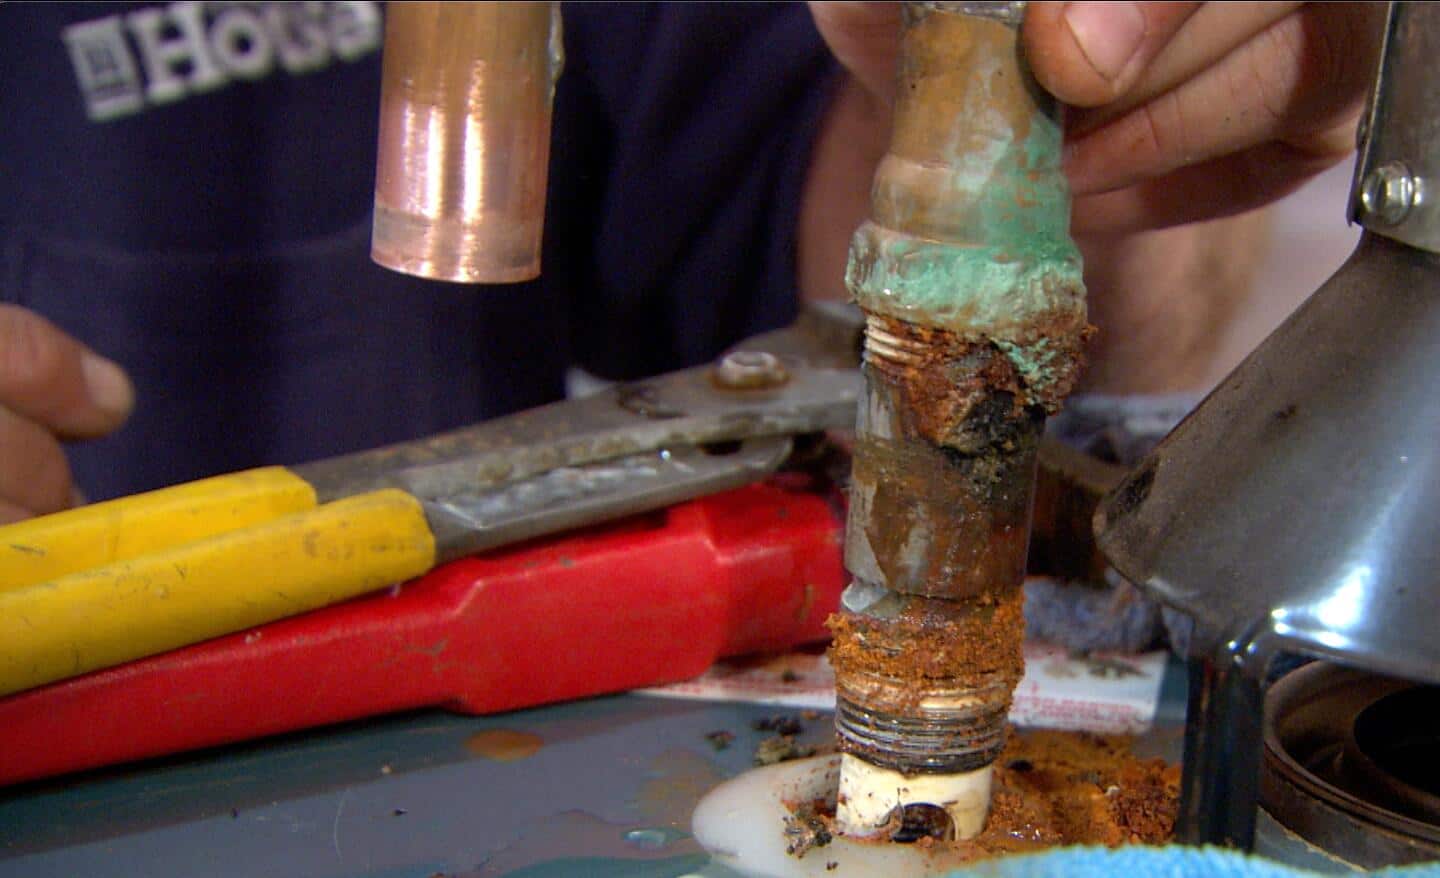 Someone removing a rusted part of a water heater.